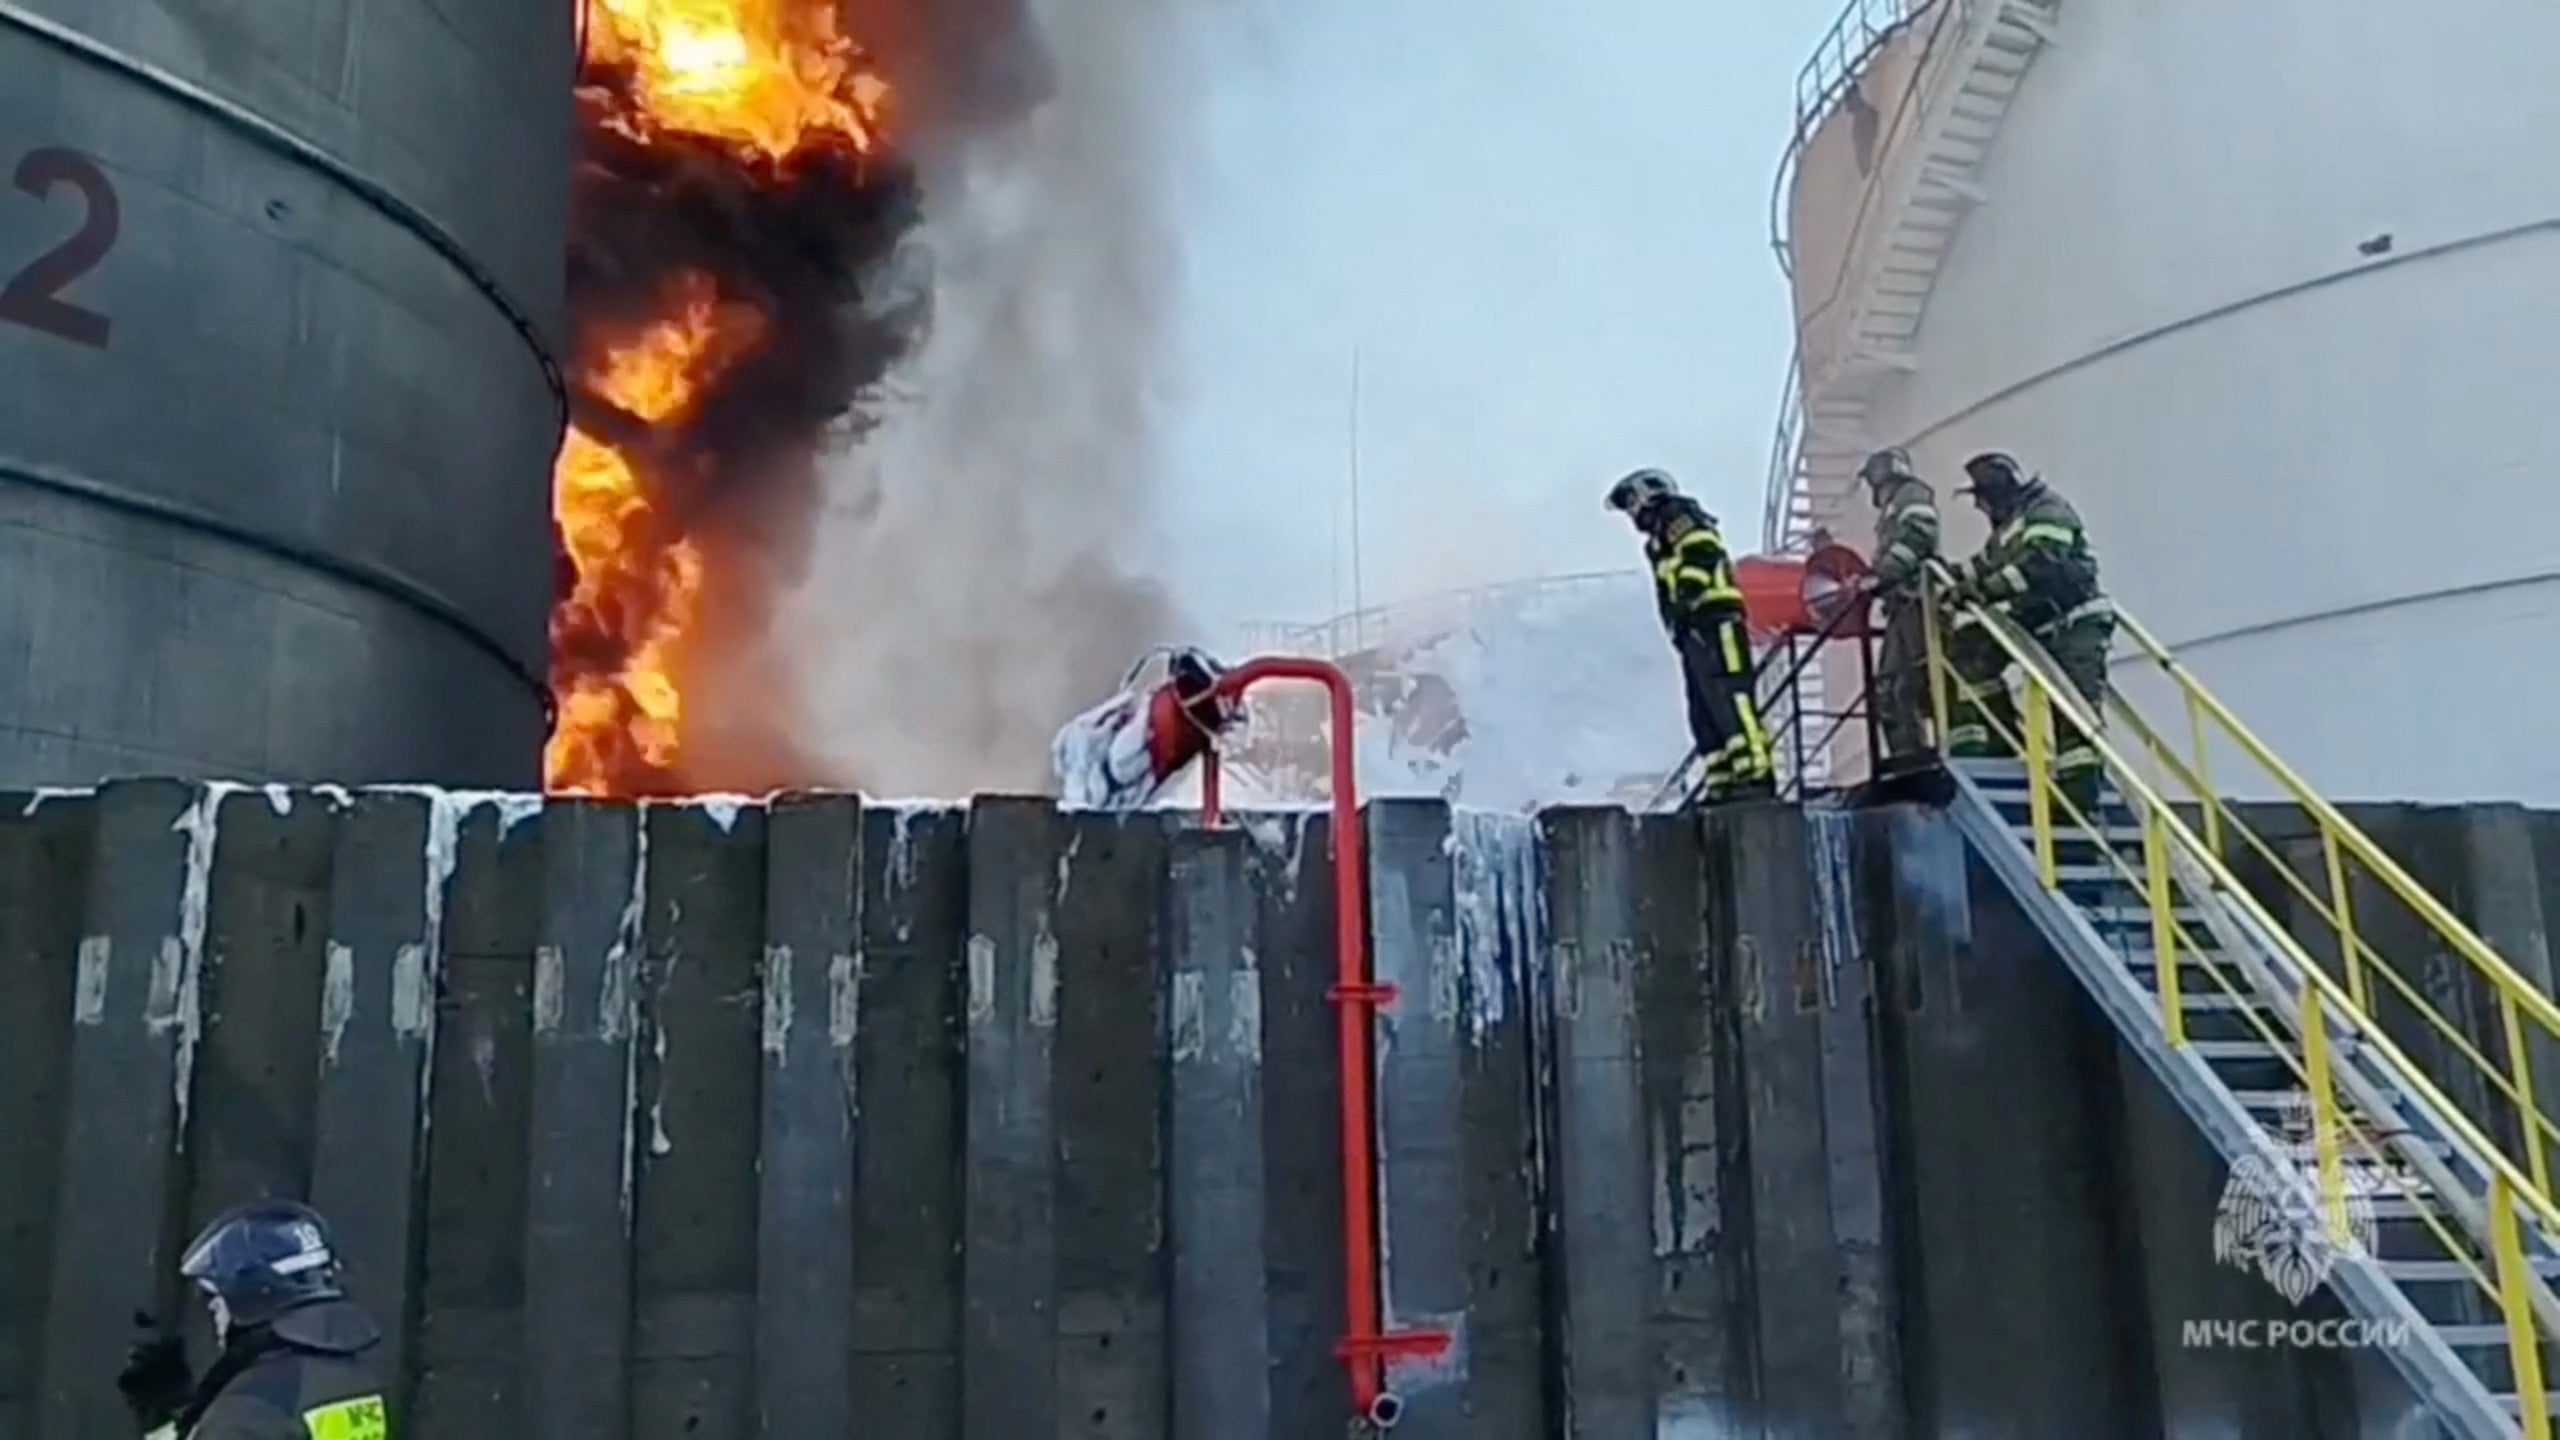 Members of the Russian Emergencies Ministry work to put out a fire at an oil storage tank after a suspected drone attack in the city of Azov in the southern Rostov region.